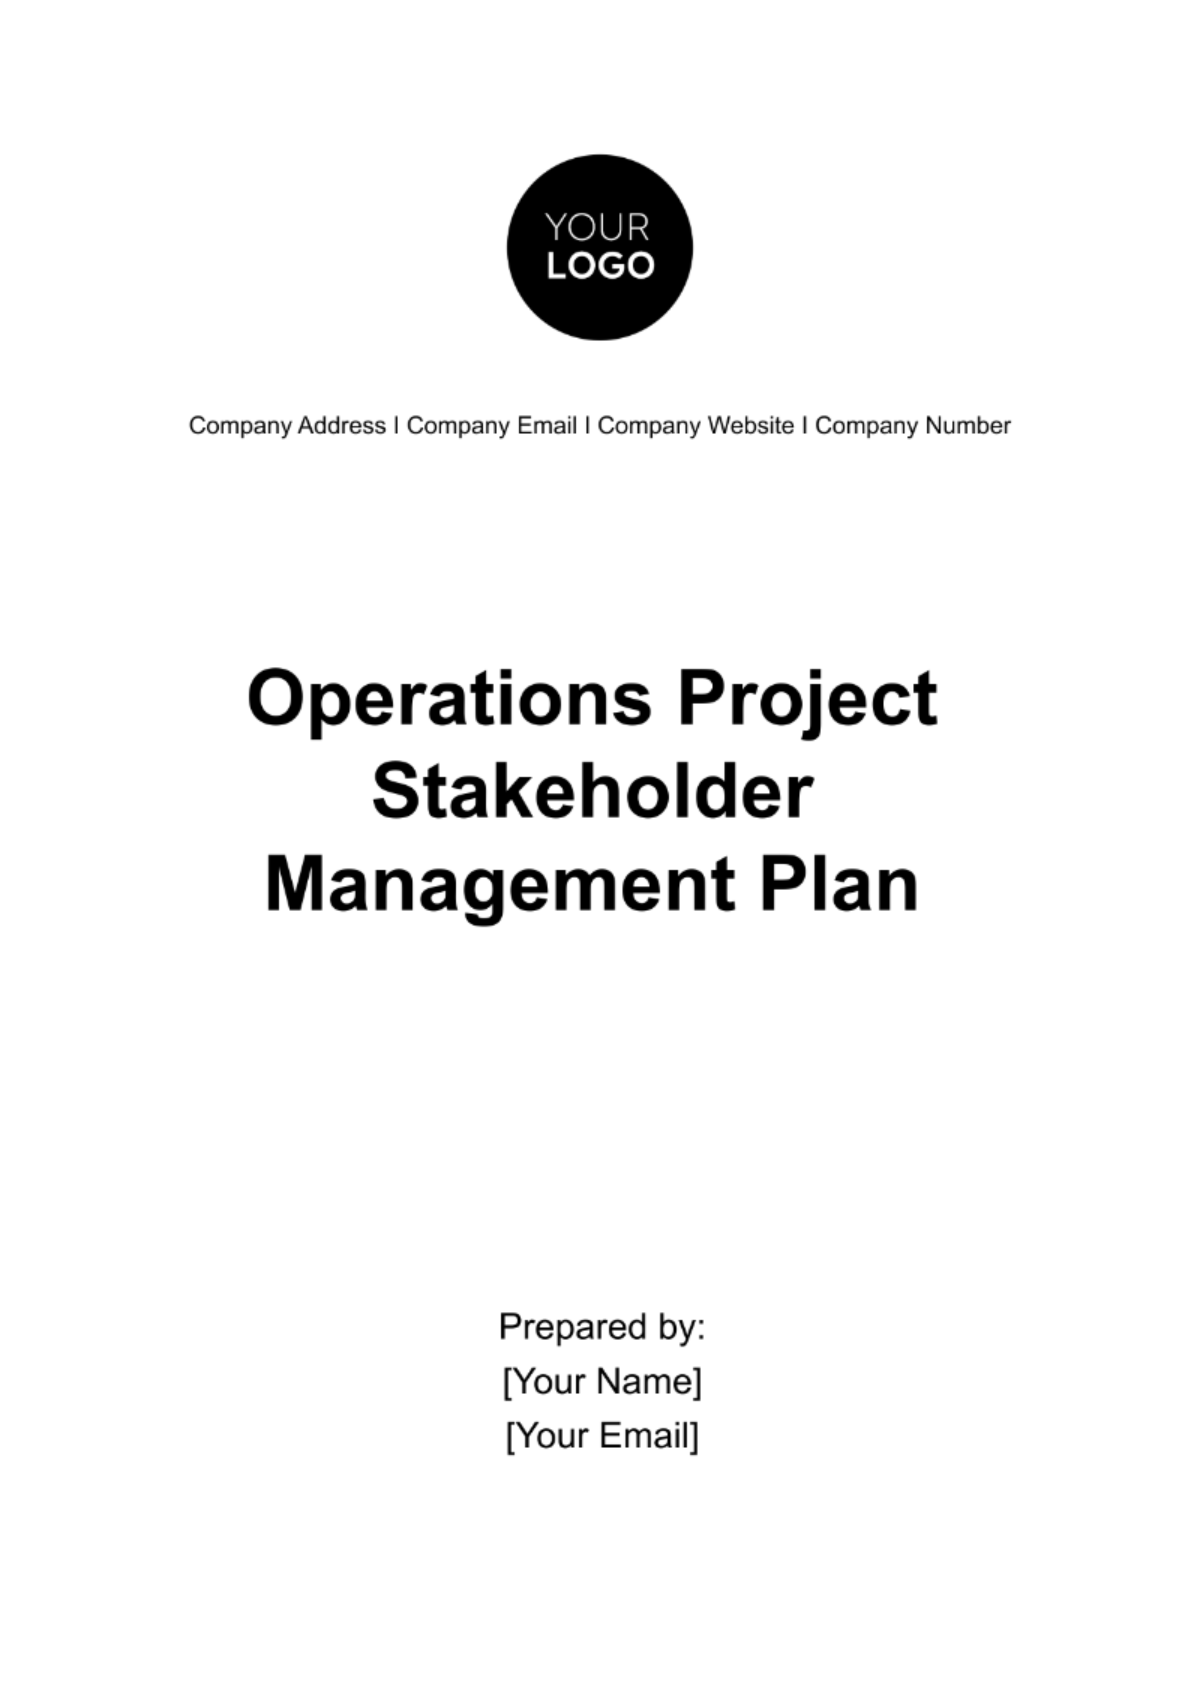 Operations Project Stakeholder Management Plan Template